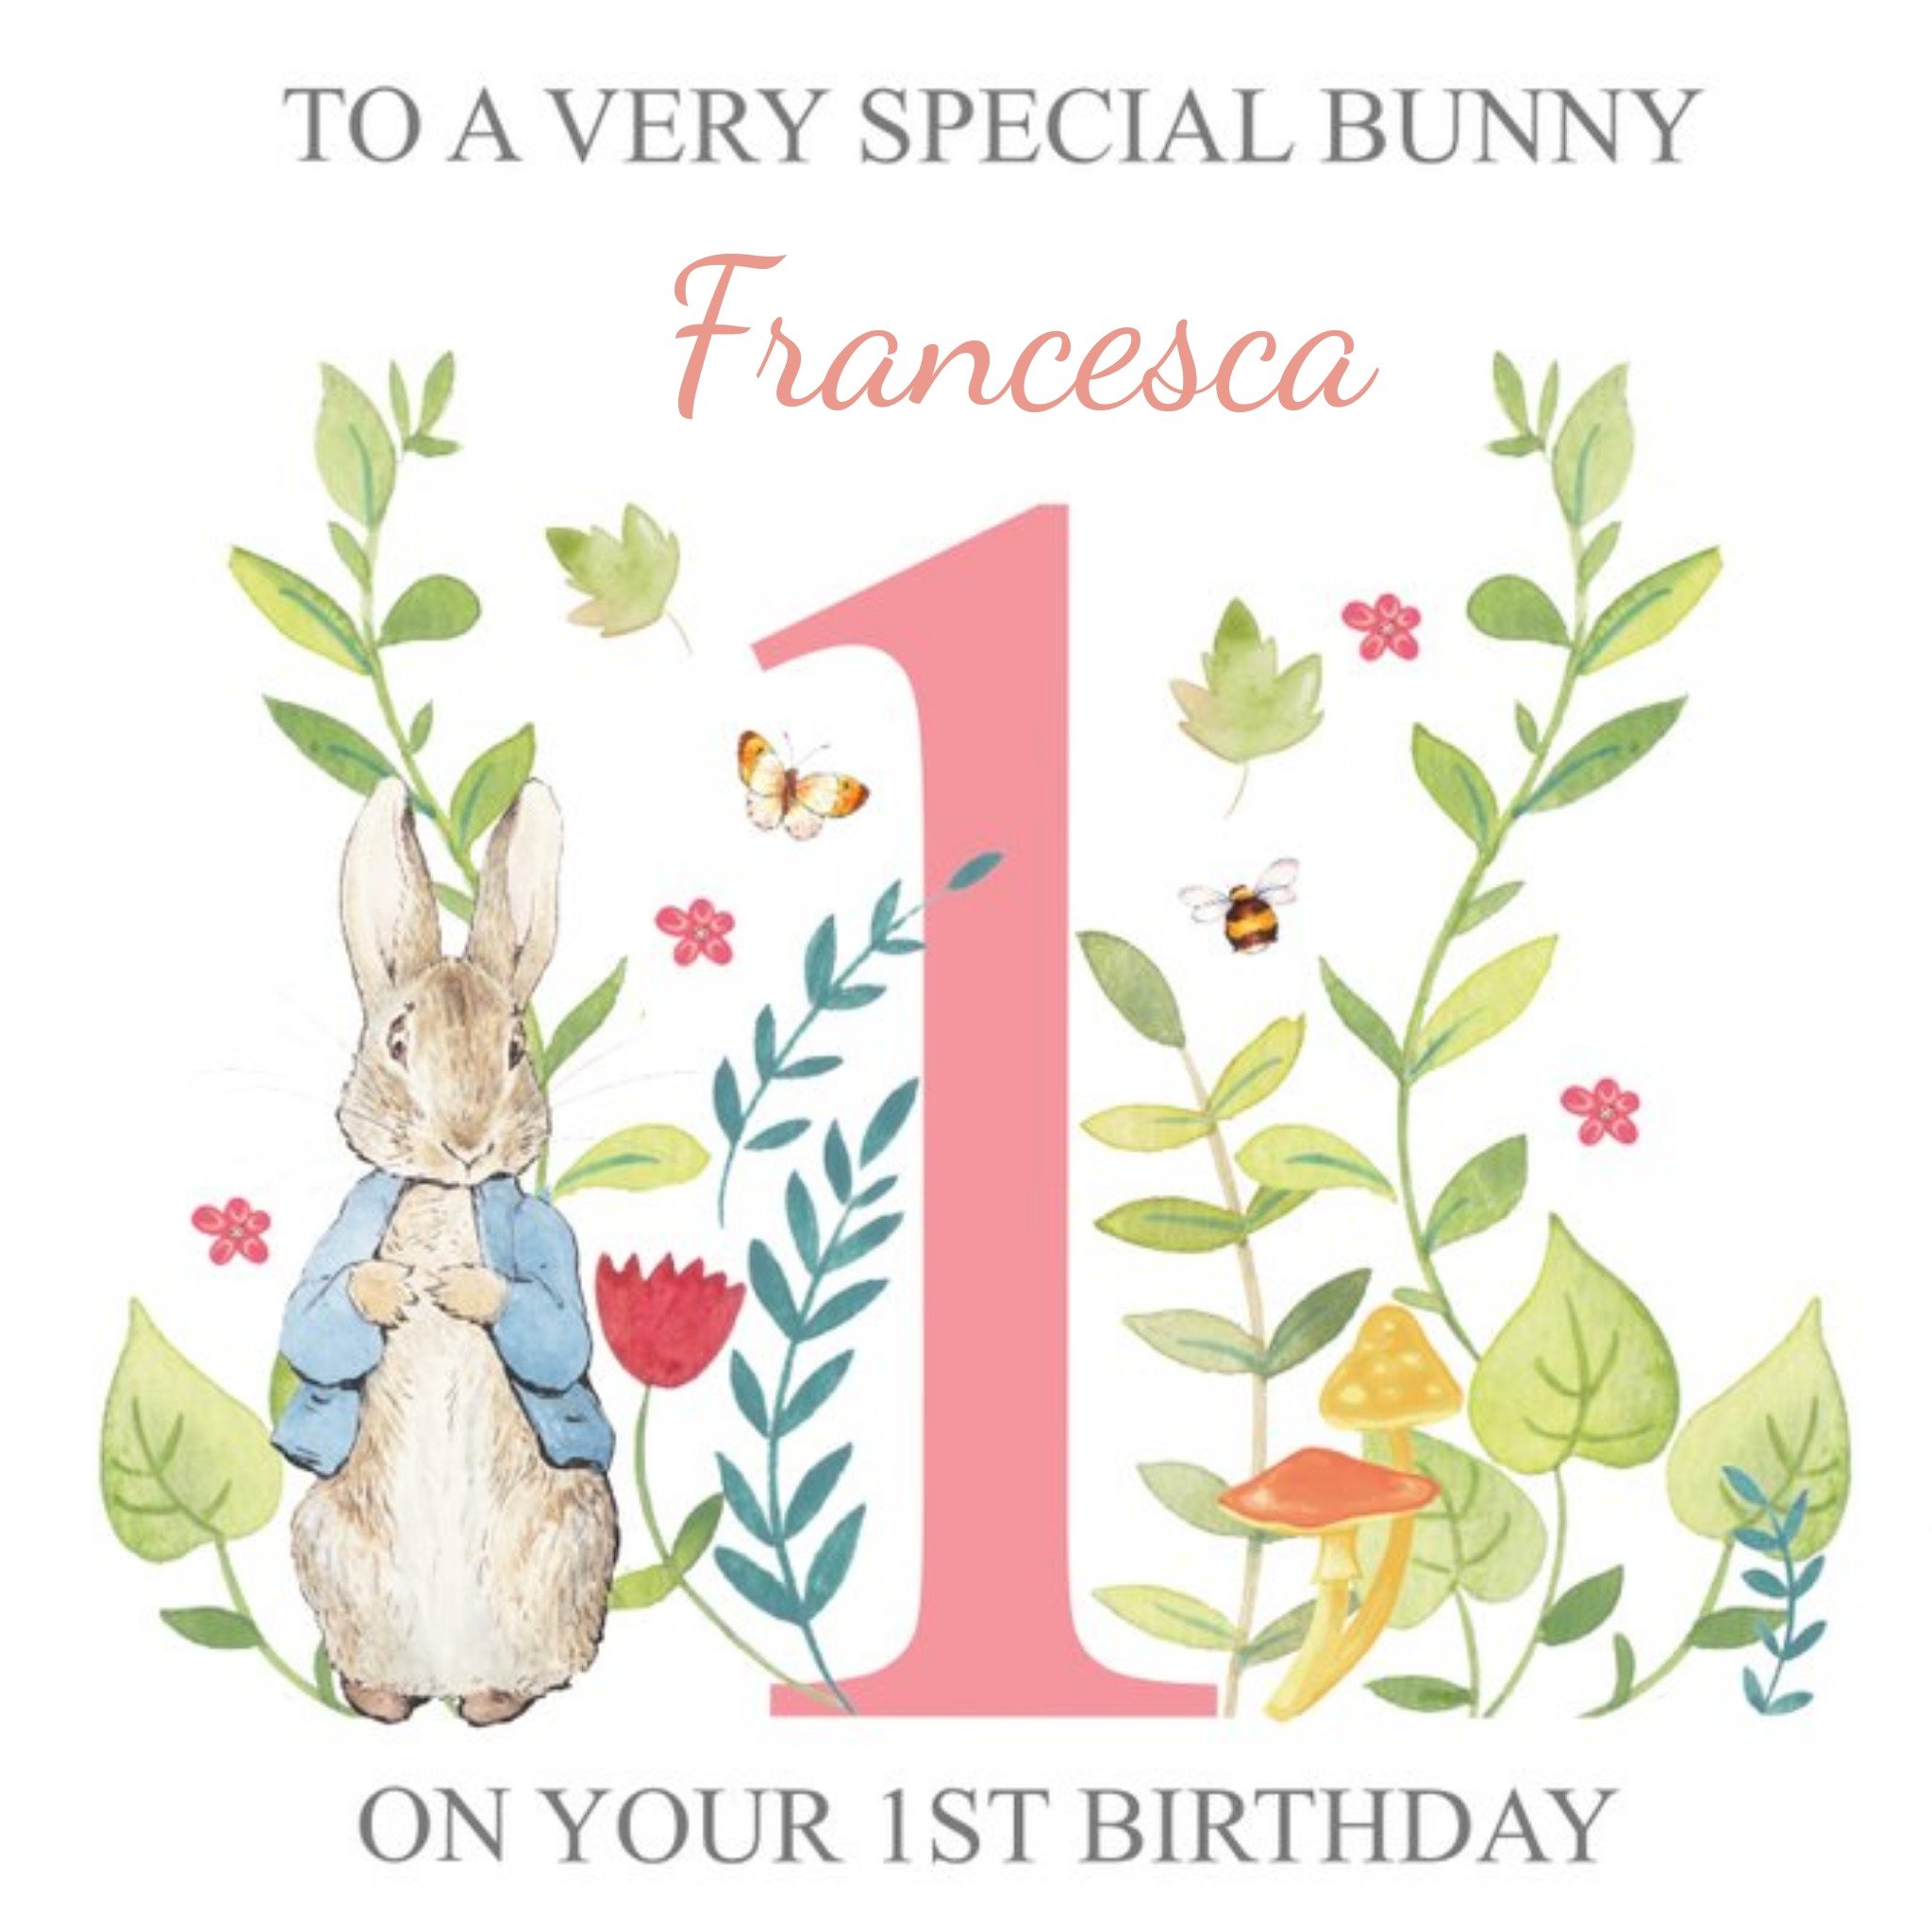 Peter Rabbit Special Bunny 1st Birthday Card, Large